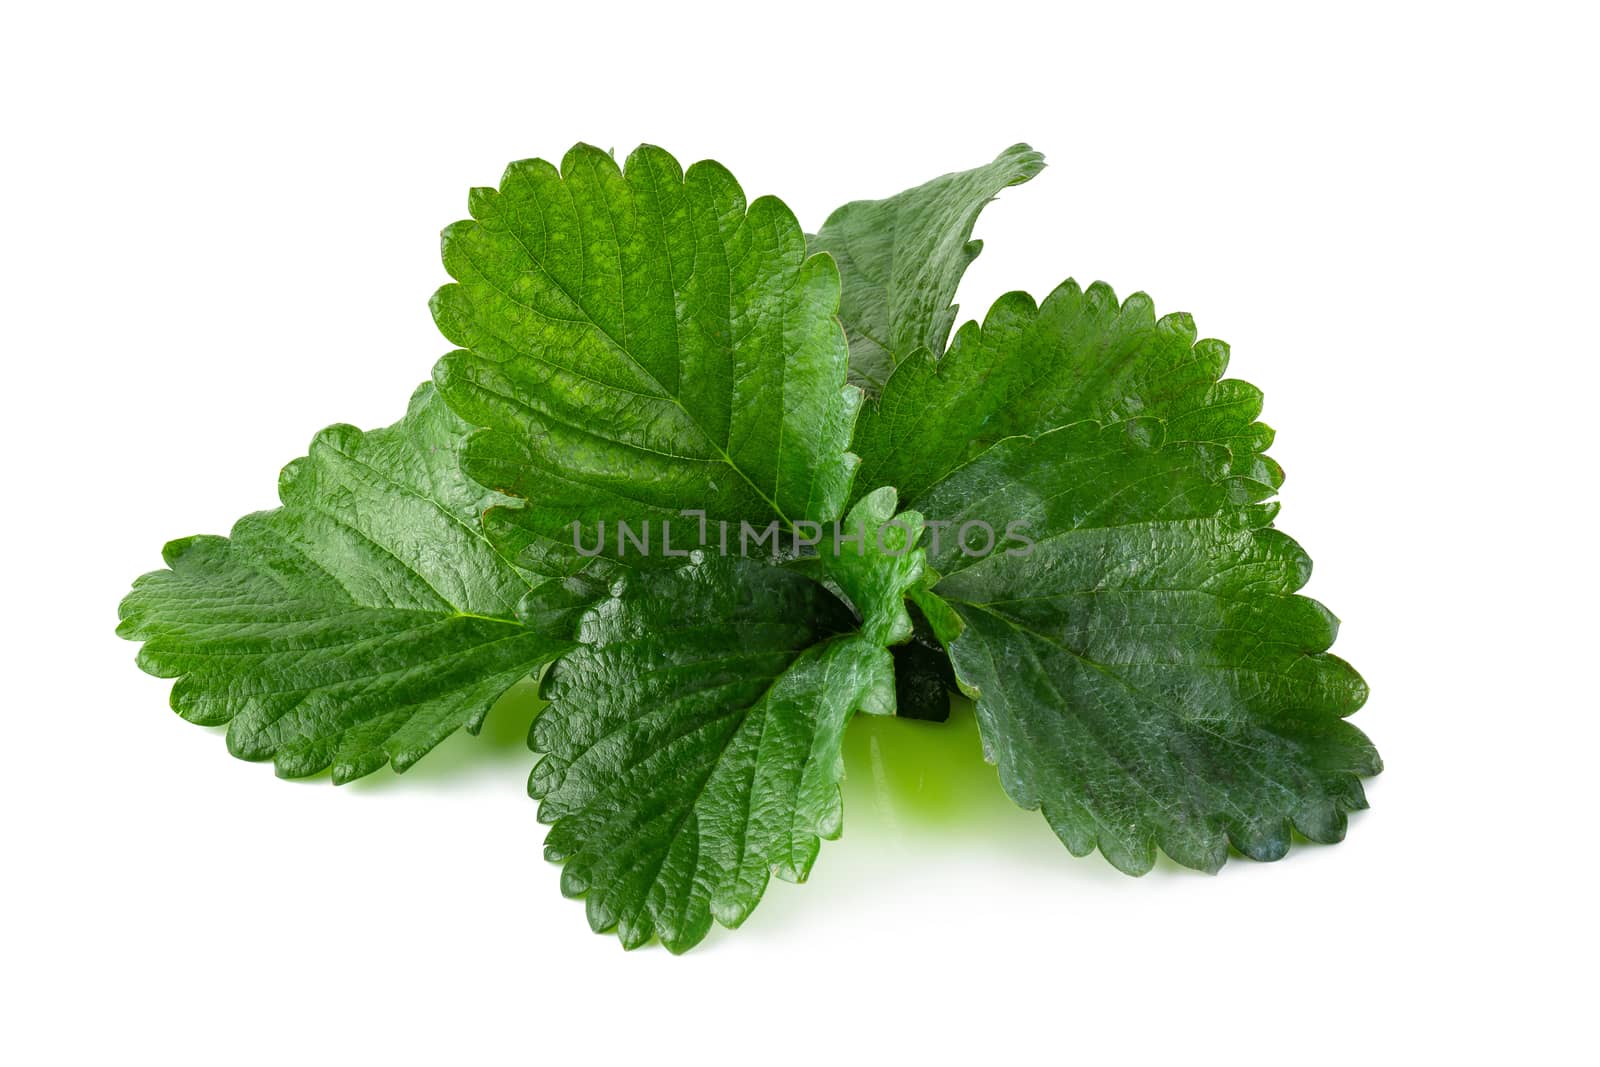 Green Strawberry Leaf isolated on white background